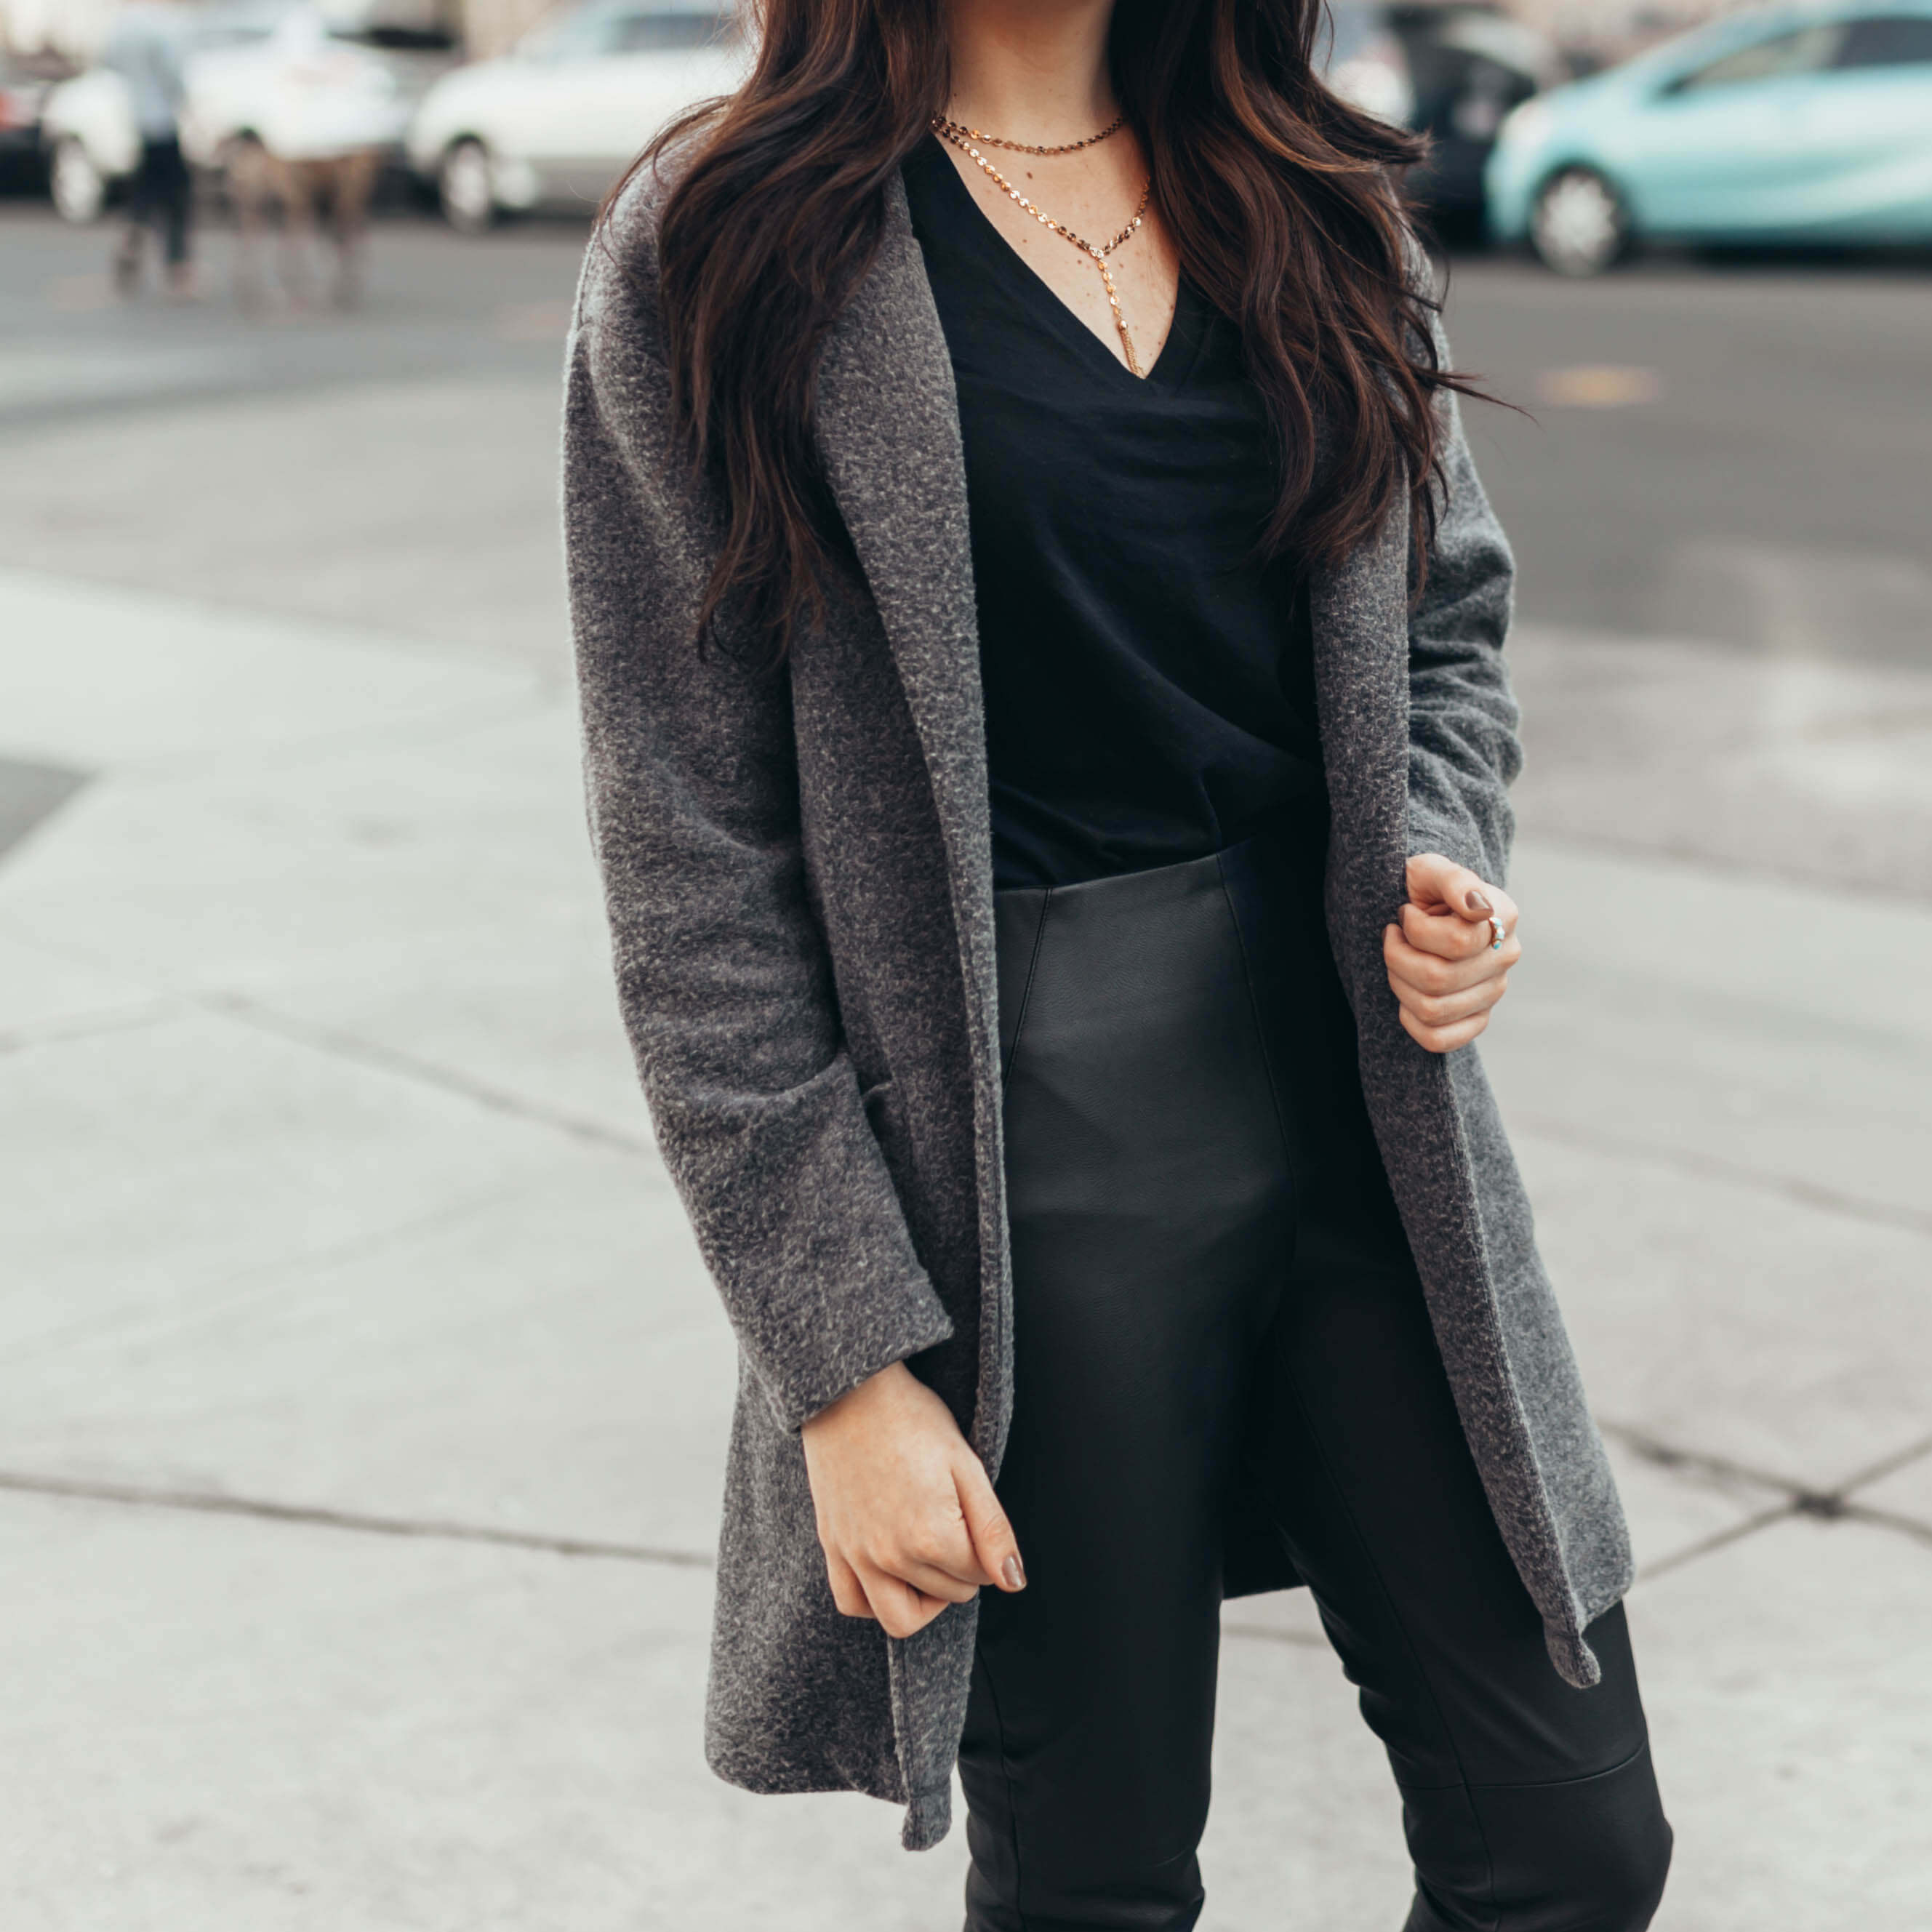 How to Style Faux Leather Pants | Twinspiration